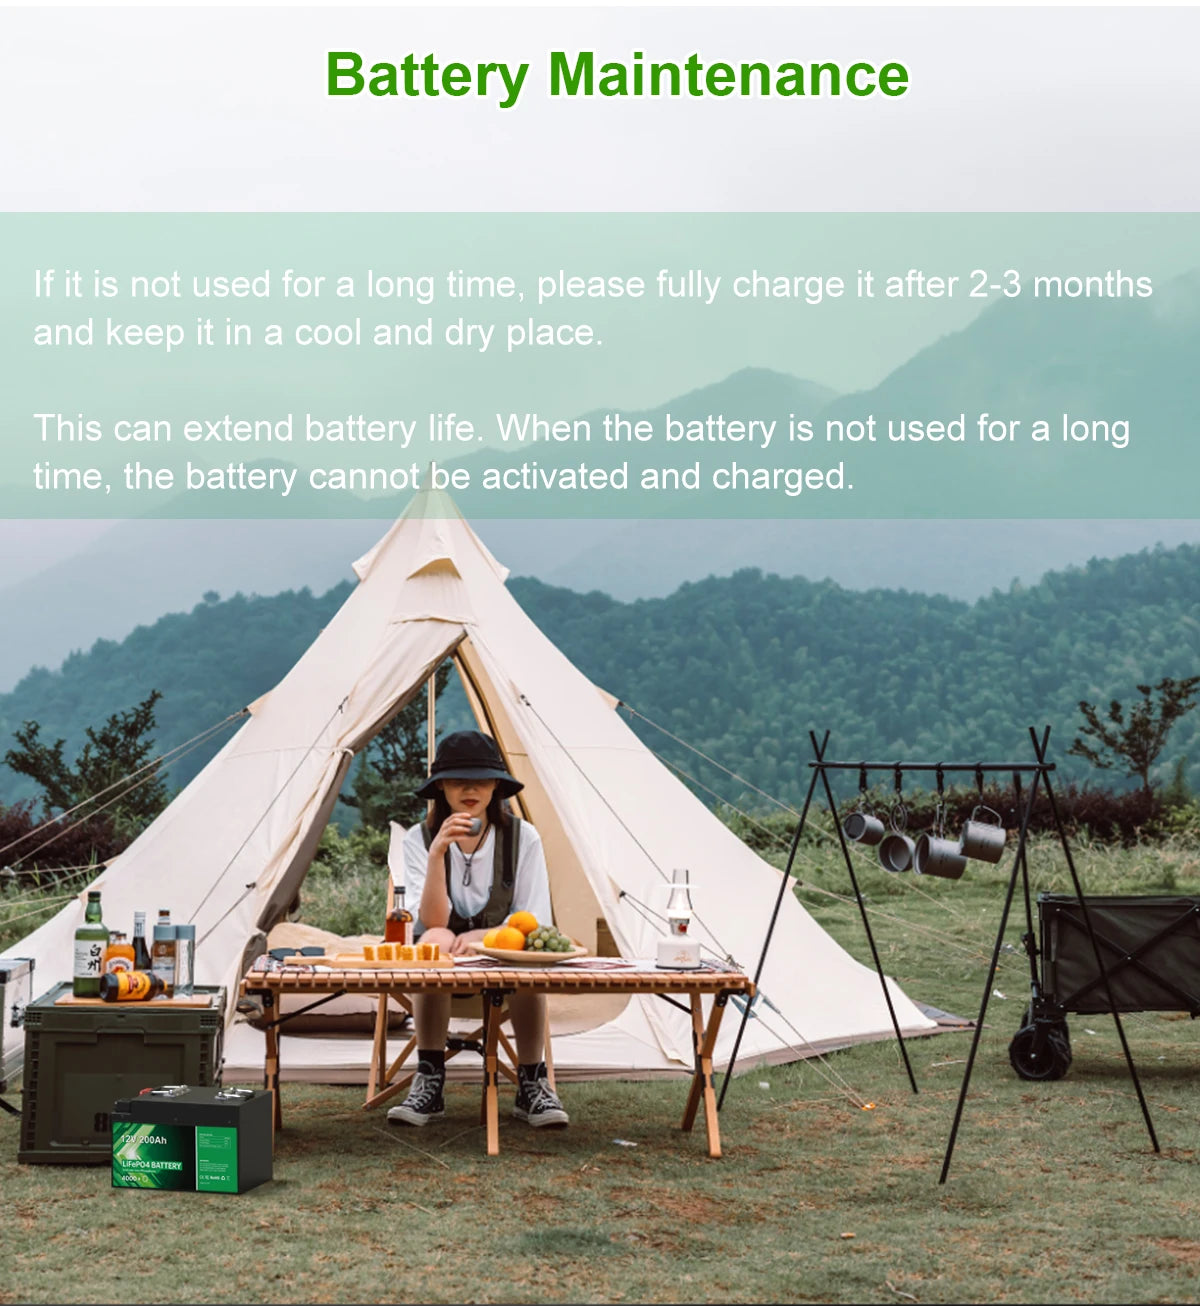 12V 200Ah LiFePO4 Battery, Properly store batteries: fully charge, keep cool, and avoid long-term disuse to prevent degradation or dry-out.